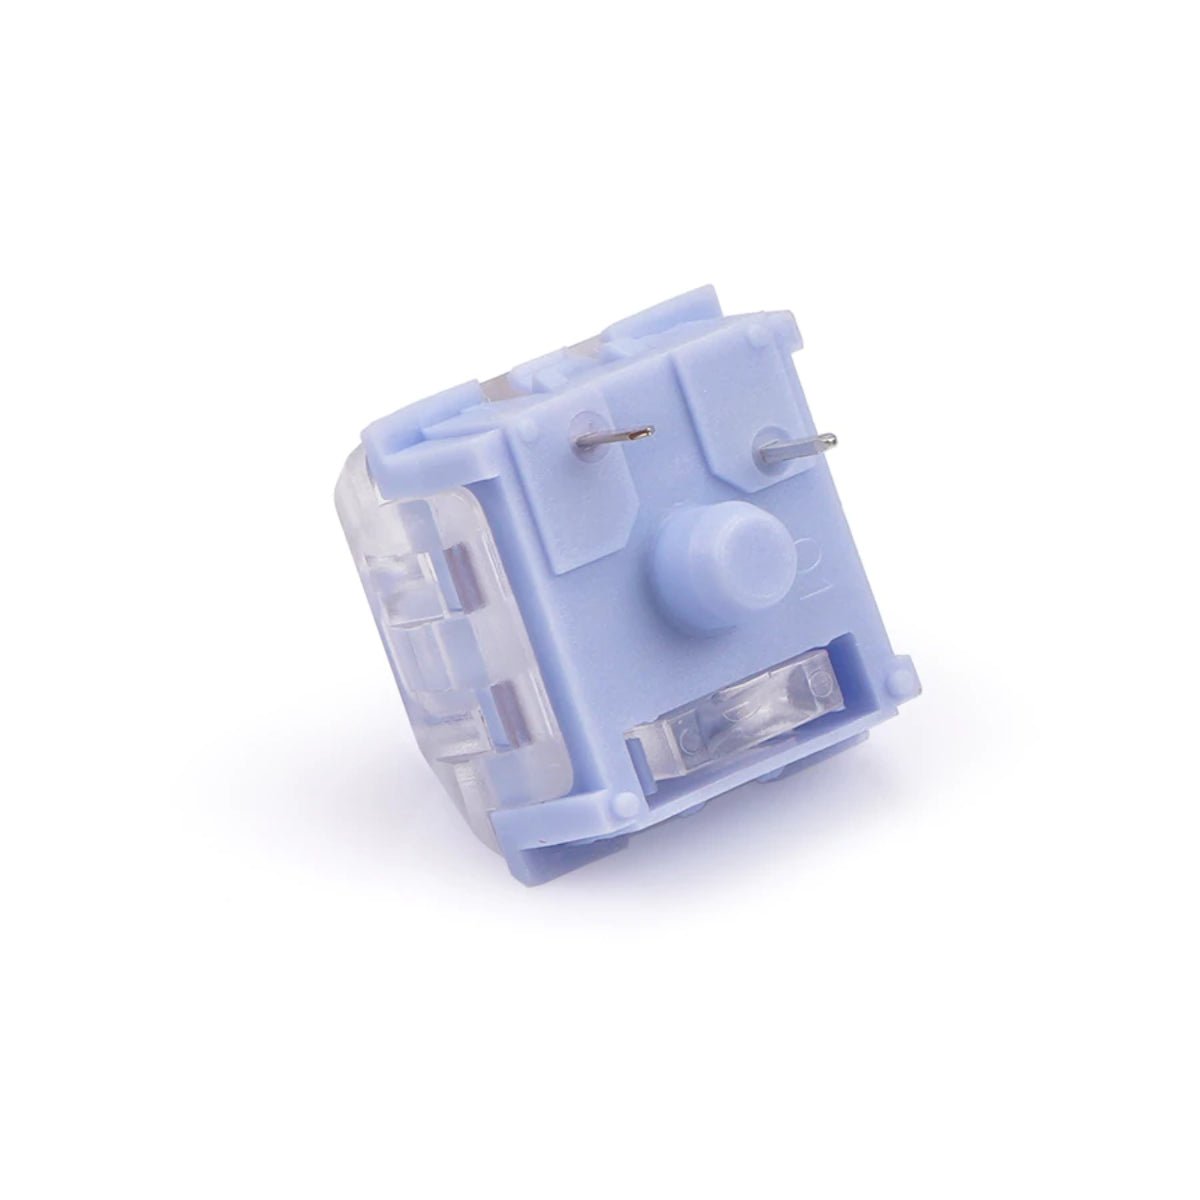 KBD Fans Kailh Tactile Switches - Polia - Store 974 | ستور ٩٧٤